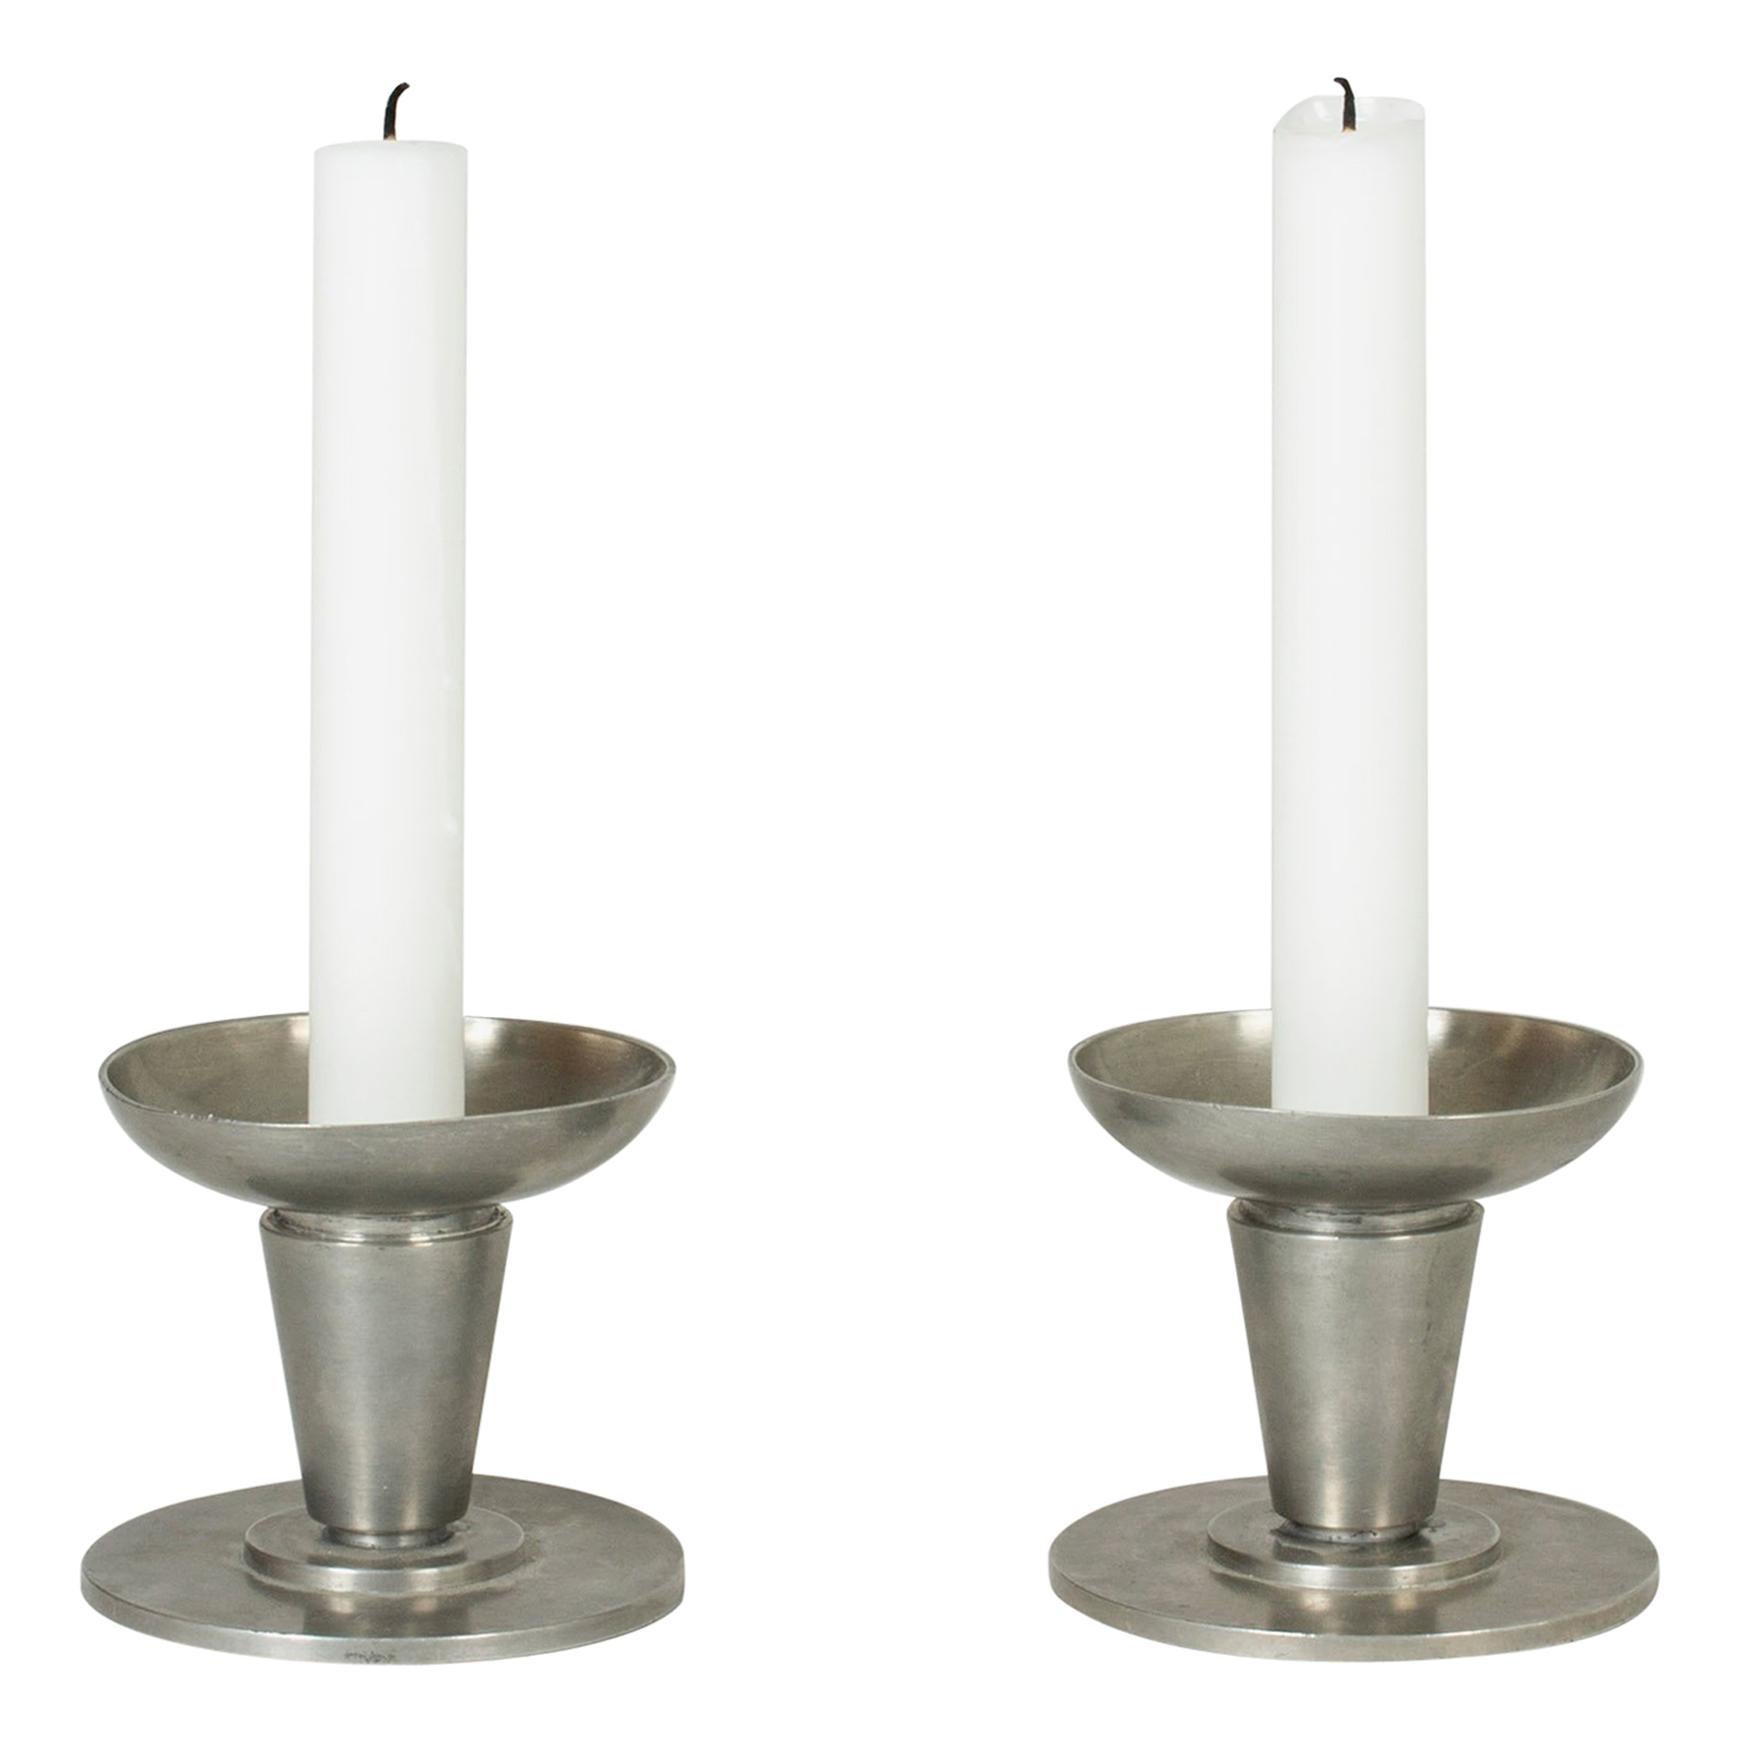 Pair of Functionalist Candlesticks from GAB